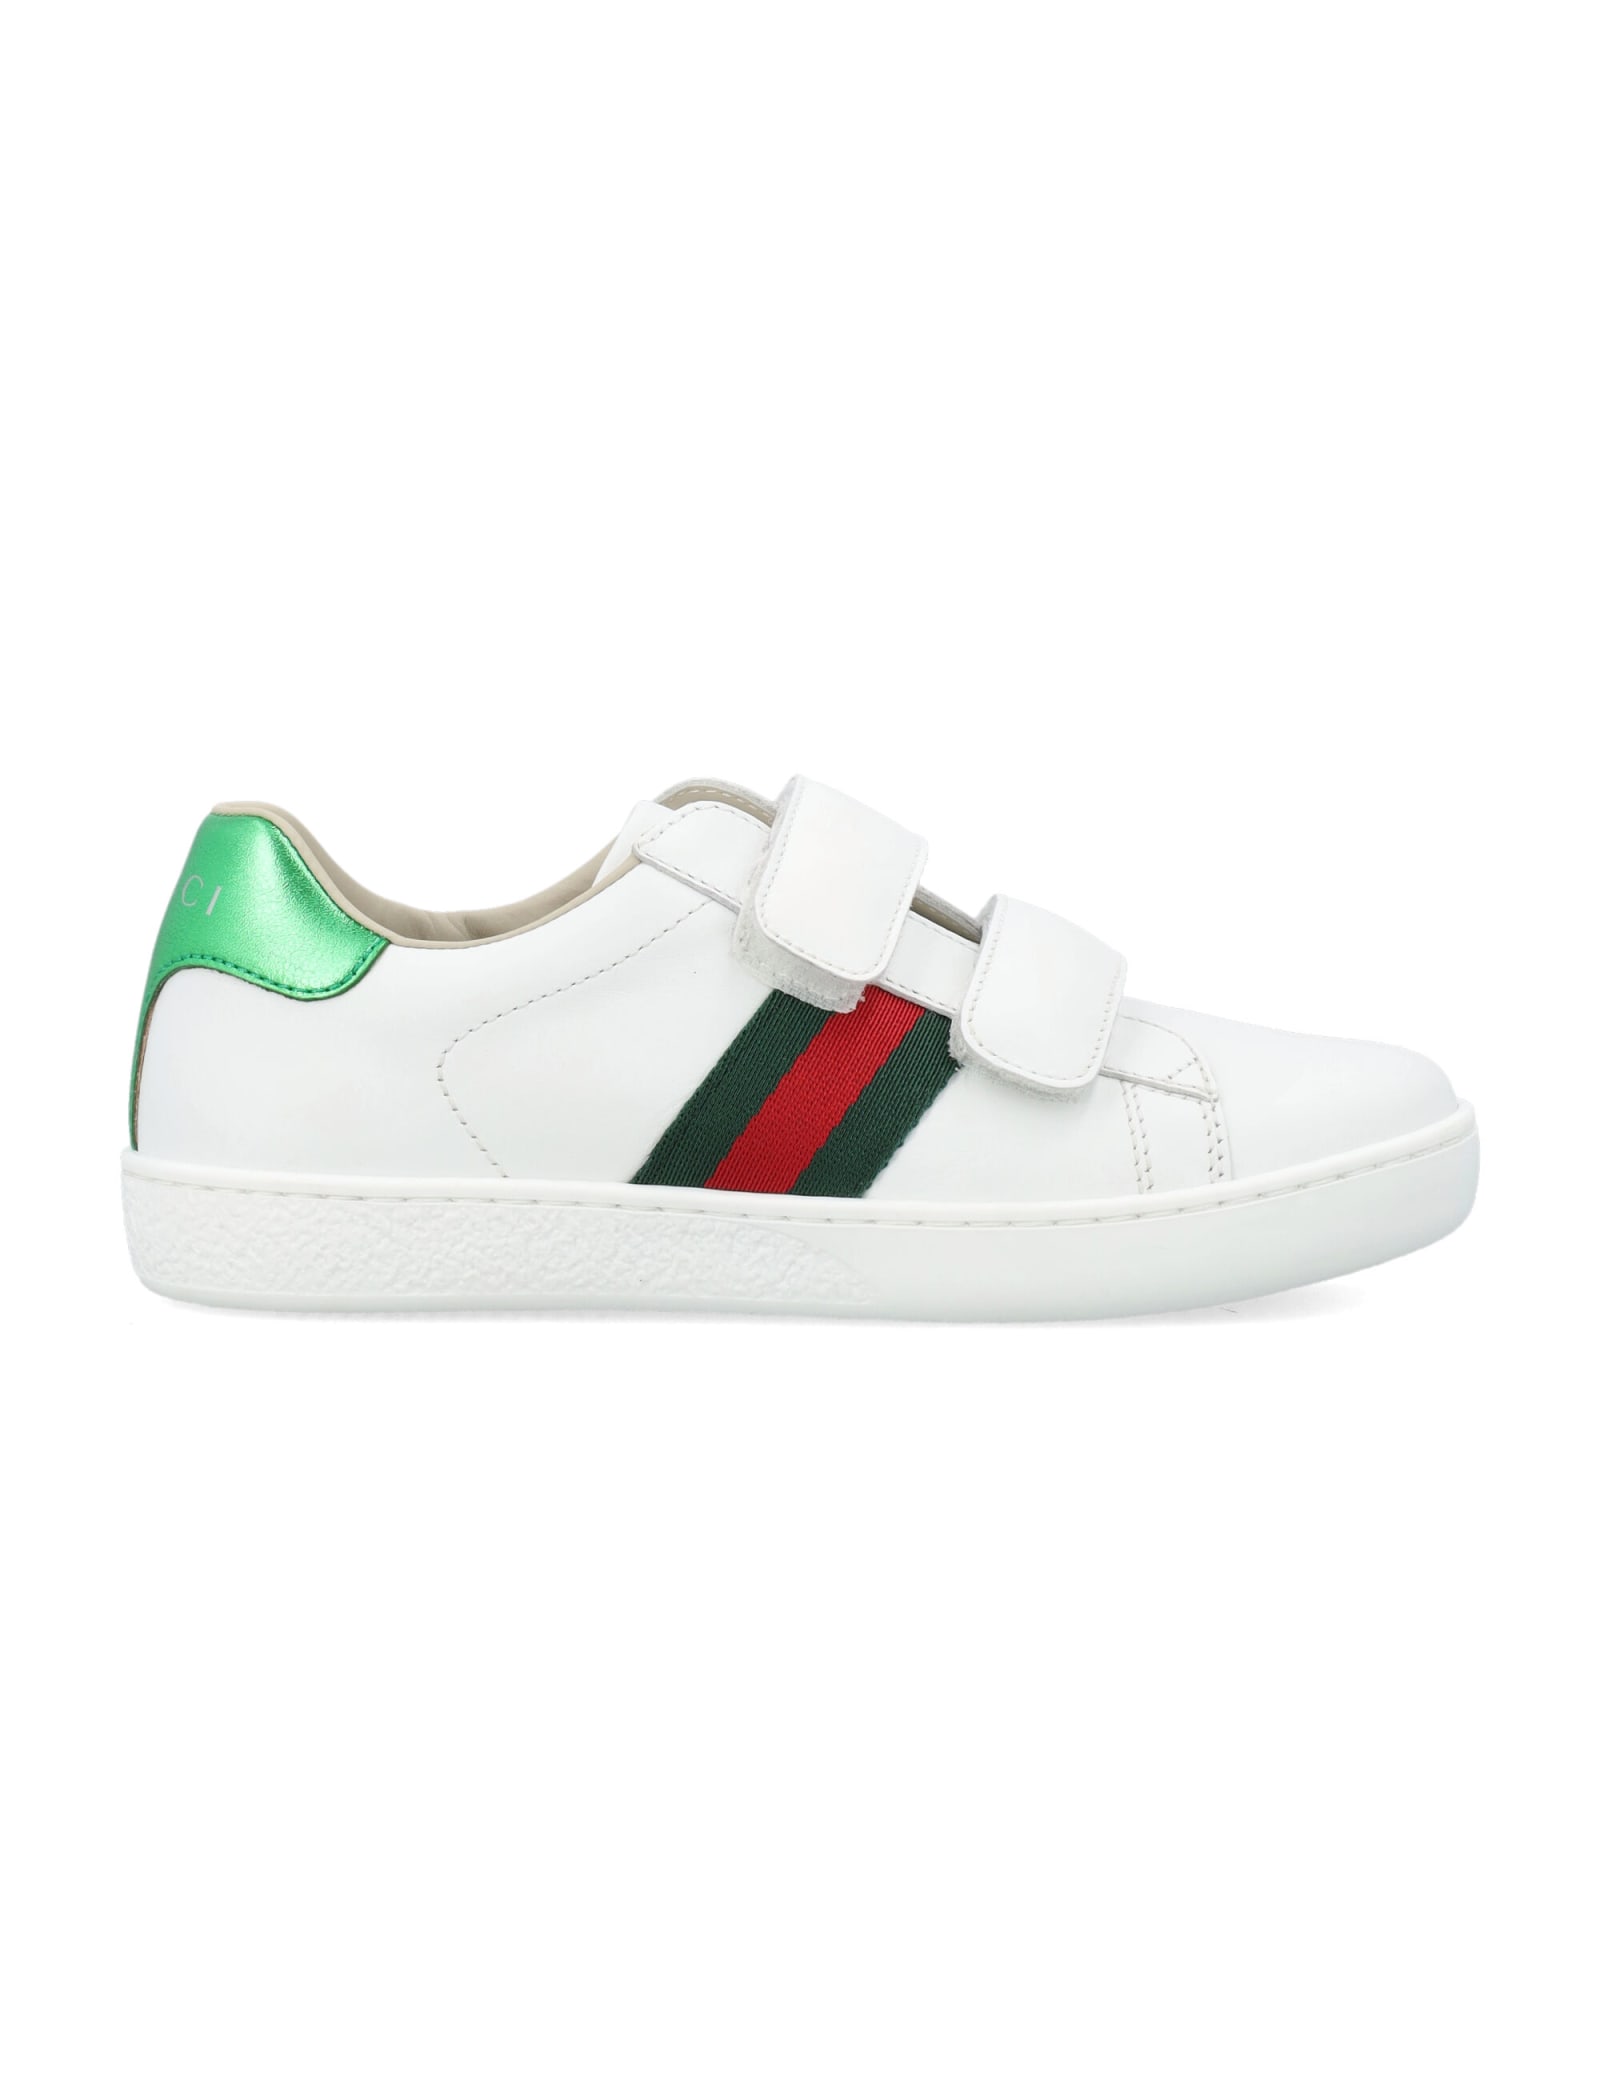 Gucci Kids' Ace Leather Sneaker In White